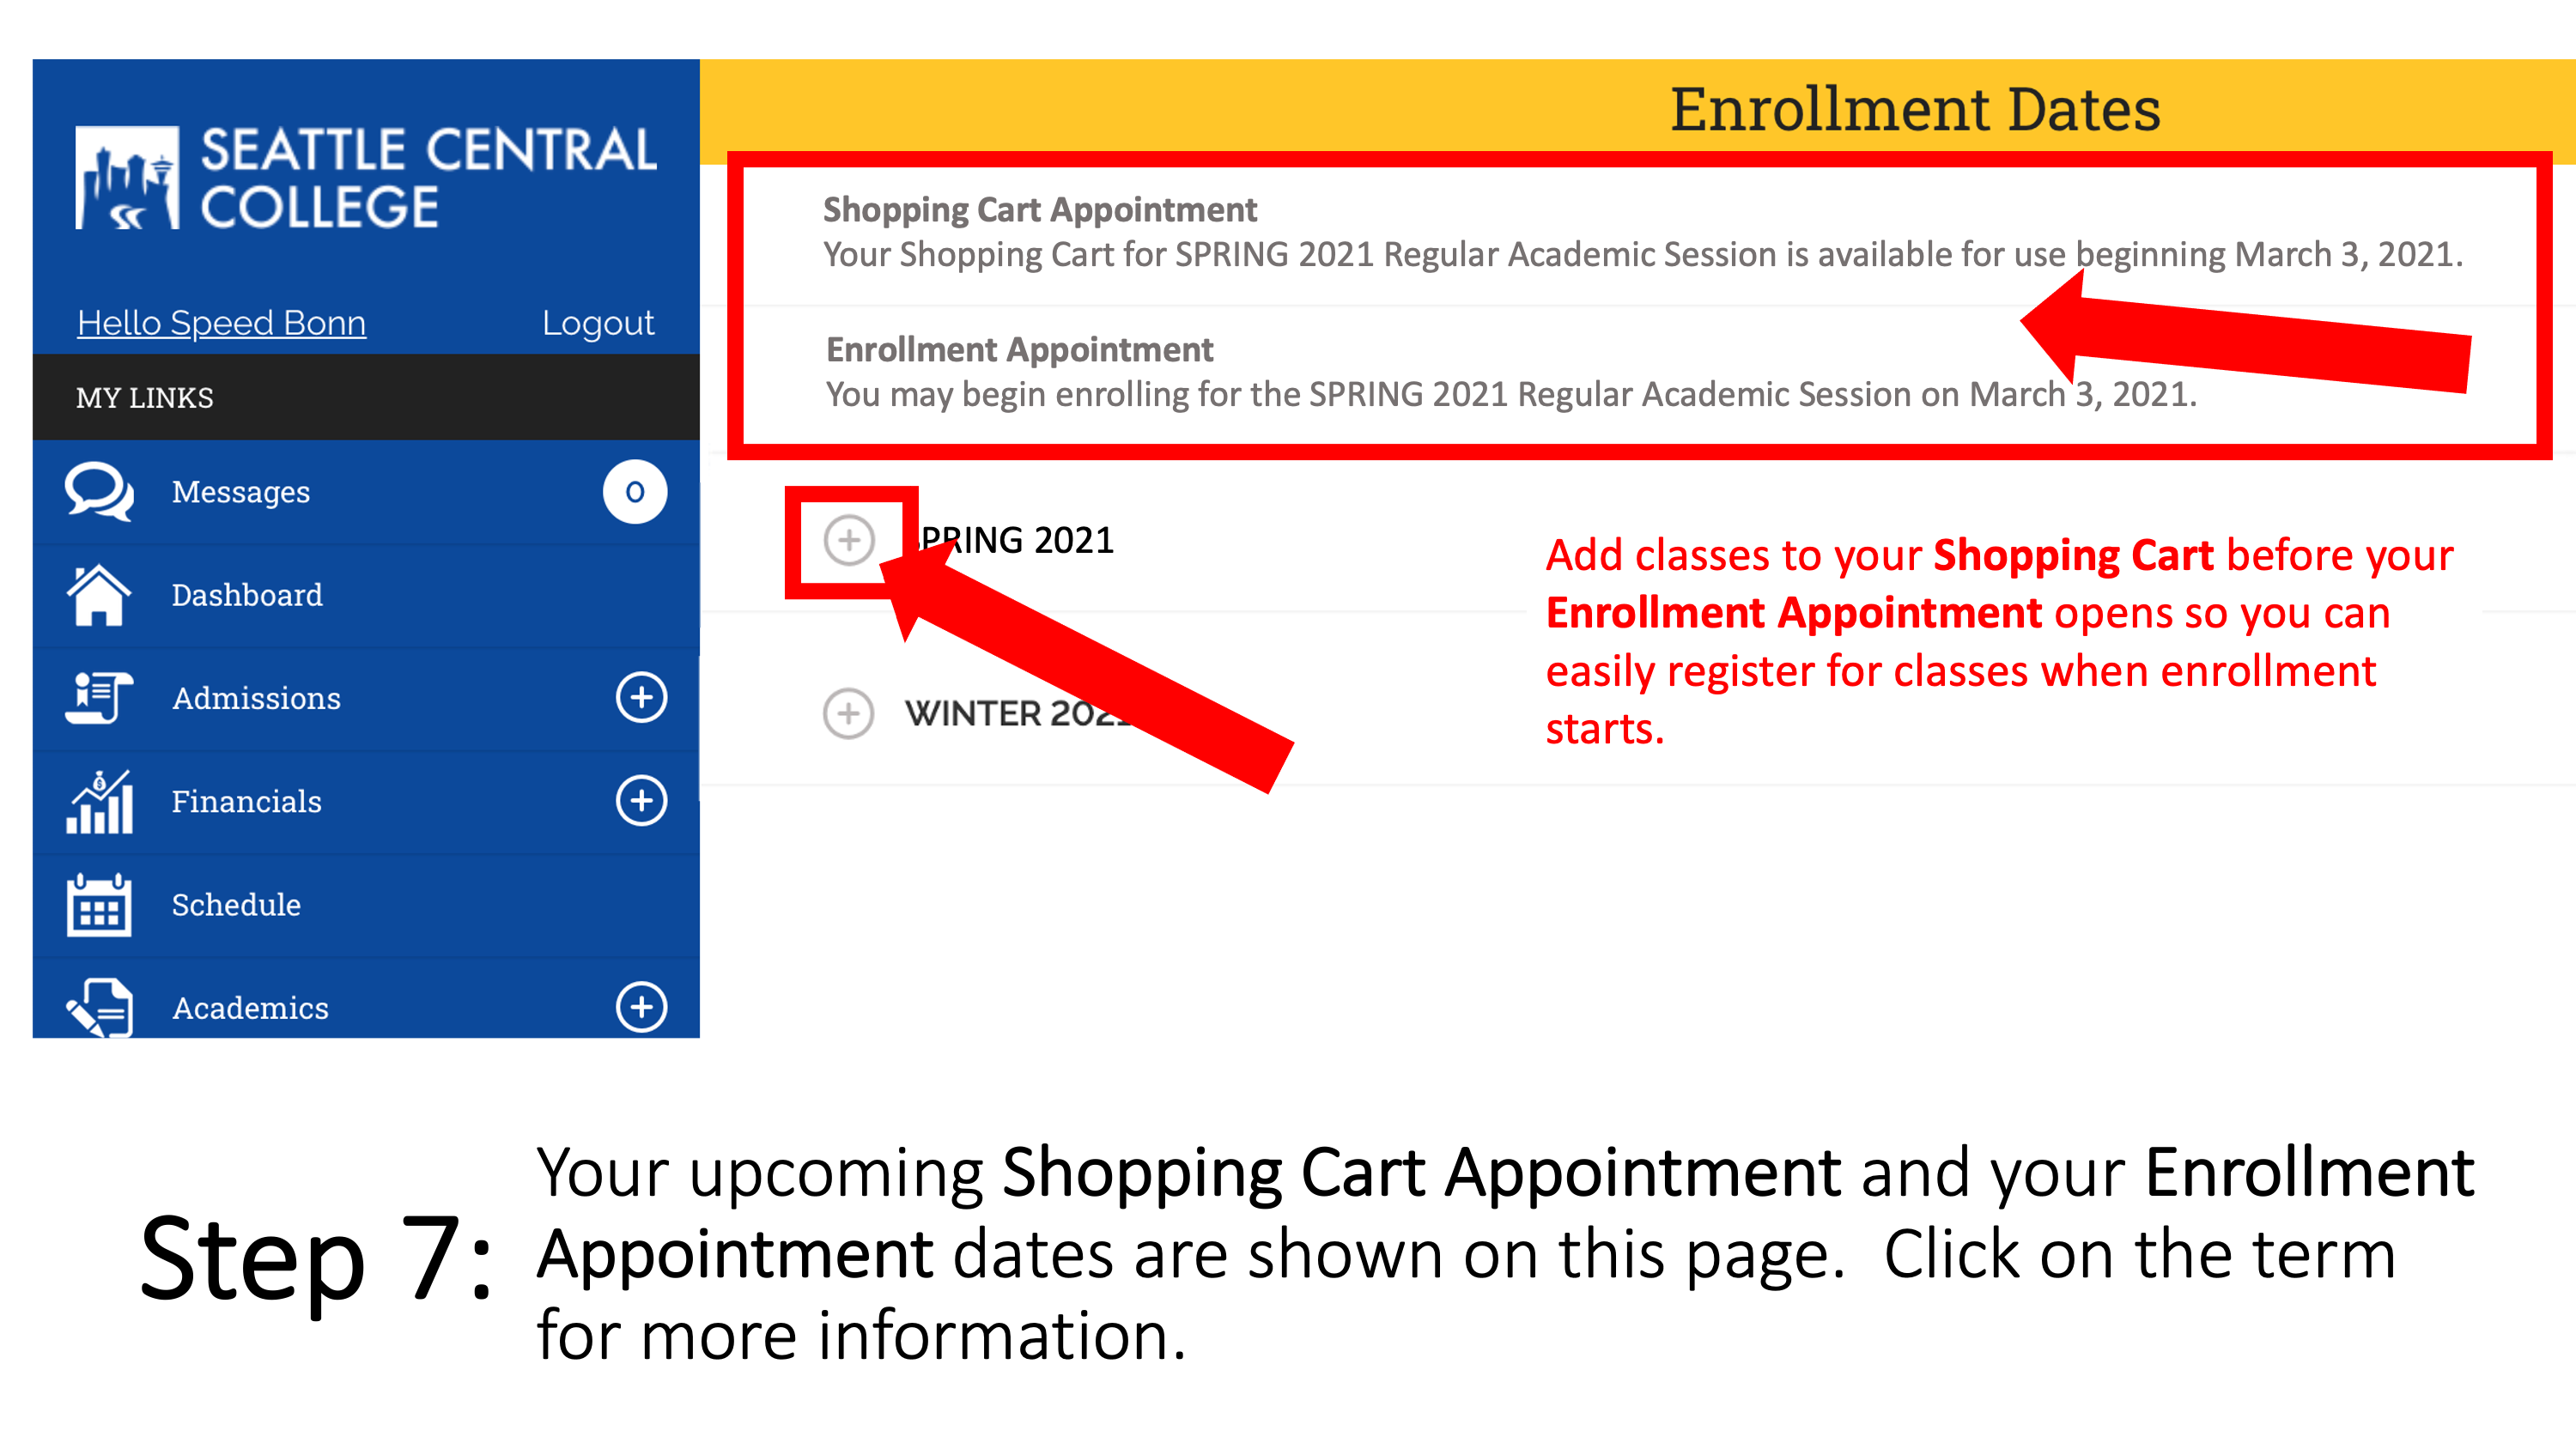 Your upcoming Shopping Cart Appointment and your Enrollment Appointment dates are shown on this page.  Click on the term for more information. Add classes to your Shopping Cart before your Enrollment Appointment opens so you can easily register for classes when enrollment starts.